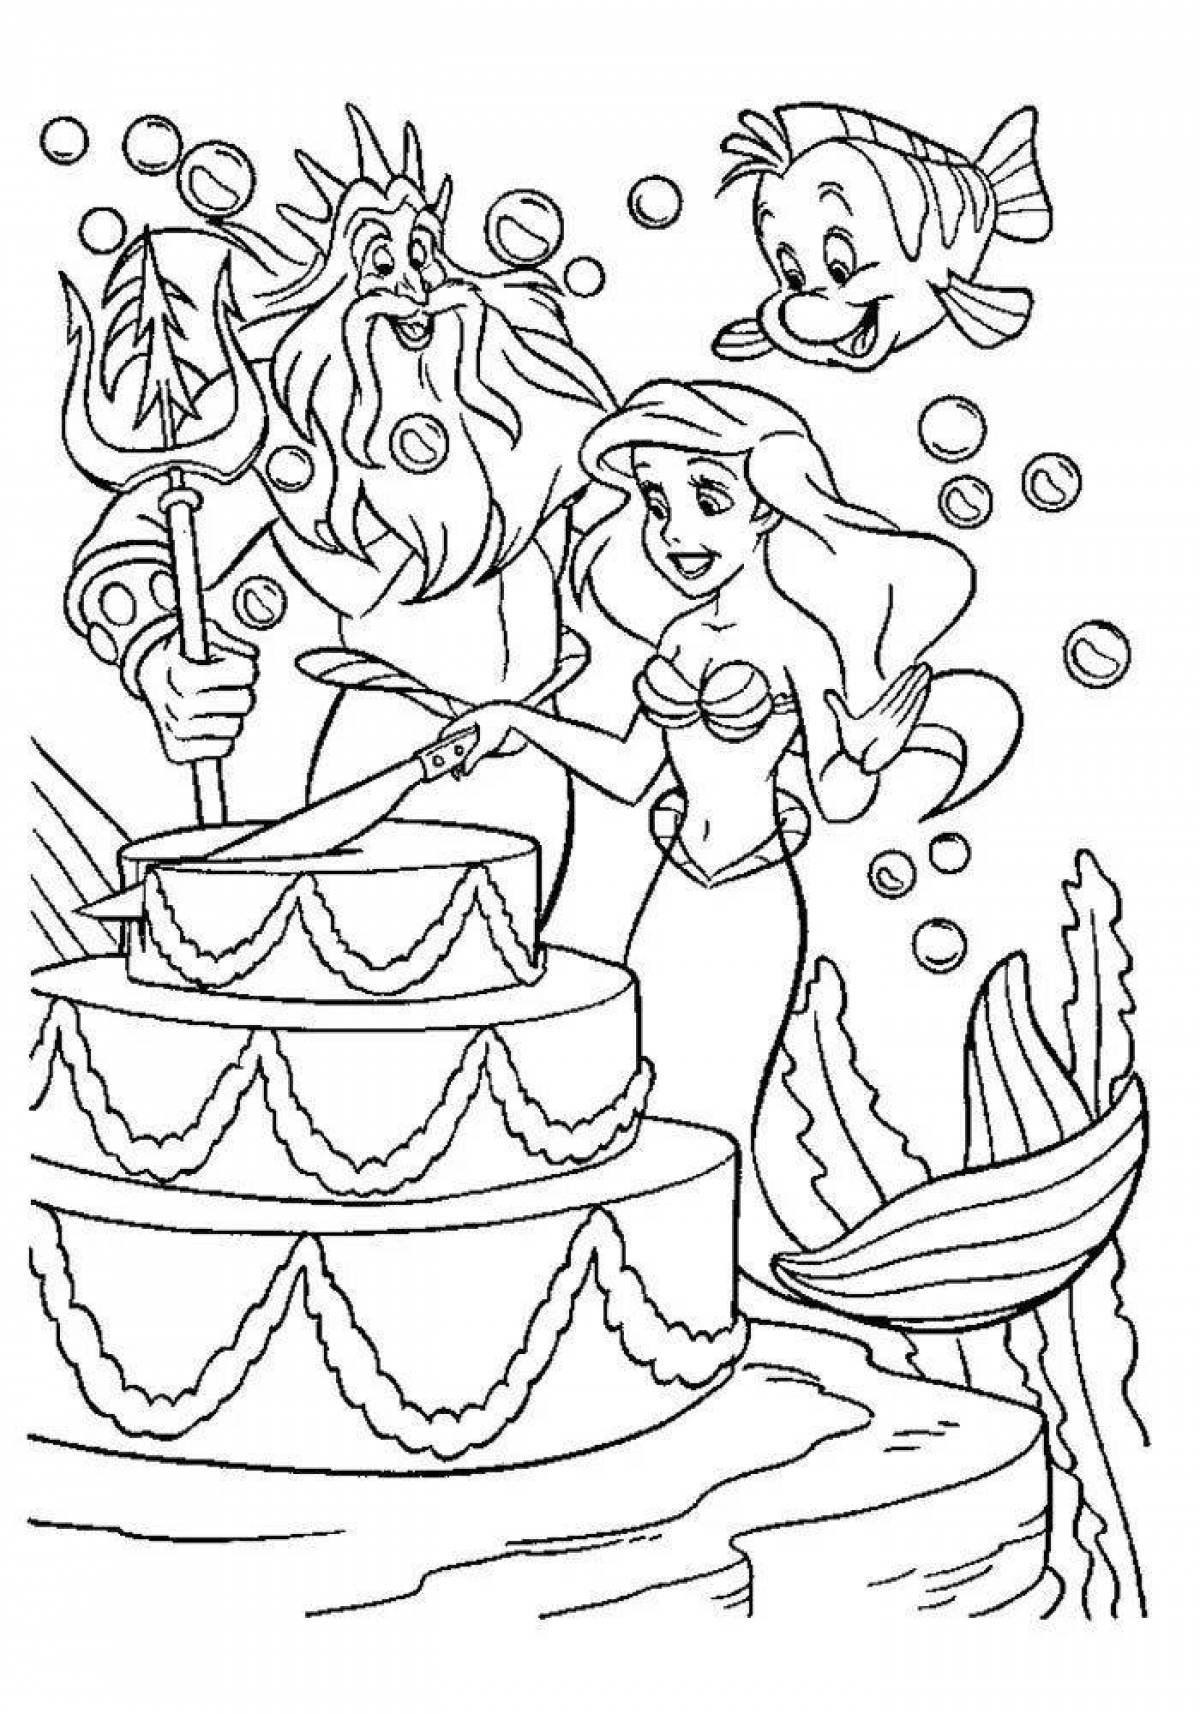 Merry mermaid coloring book for 4-5 year olds